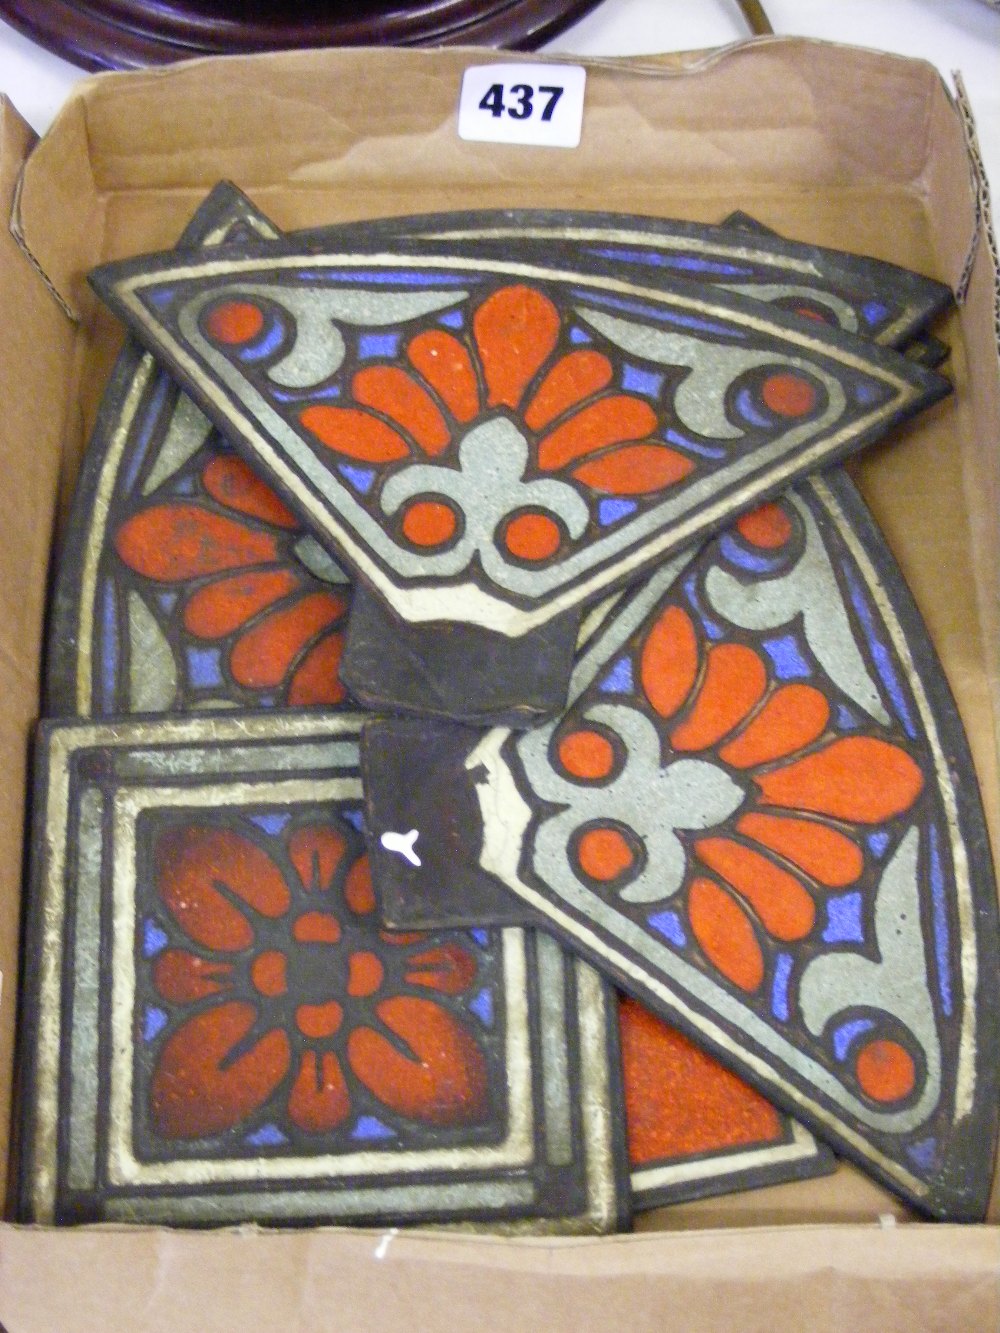 An enamelled set of metal inserts, possibly from a hanging lamp.